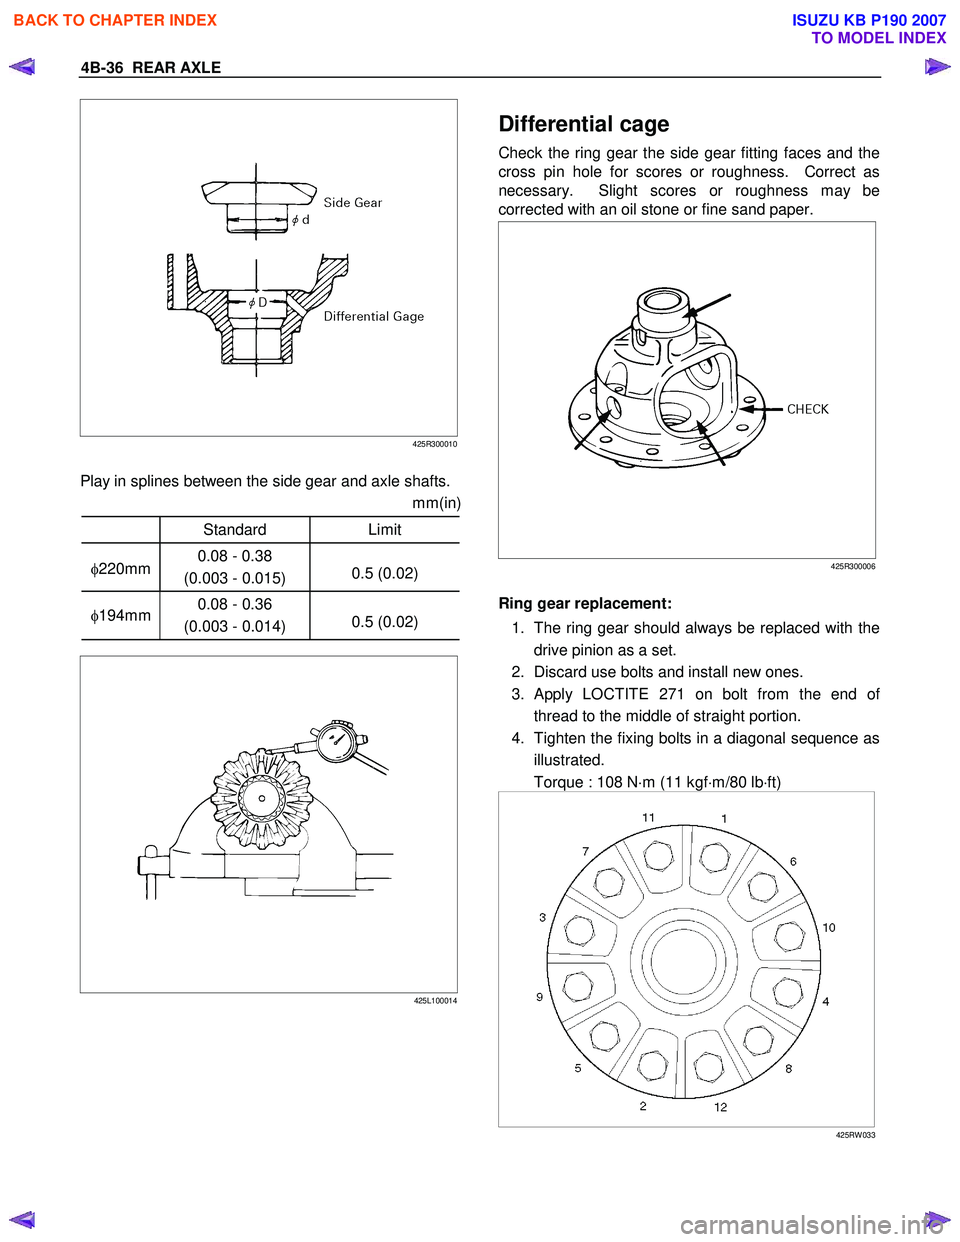 ISUZU KB P190 2007  Workshop Owners Manual 4B-36  REAR AXLE 
425R300010
  
Play in splines between the side gear and axle shafts. mm(in)
   Standard  Limit 
φ220mm  0.08 - 0.38 
(0.003 - 0.015)  0.5 (0.02) 
φ
194mm  0.08 - 0.36 
(0.003 - 0.0